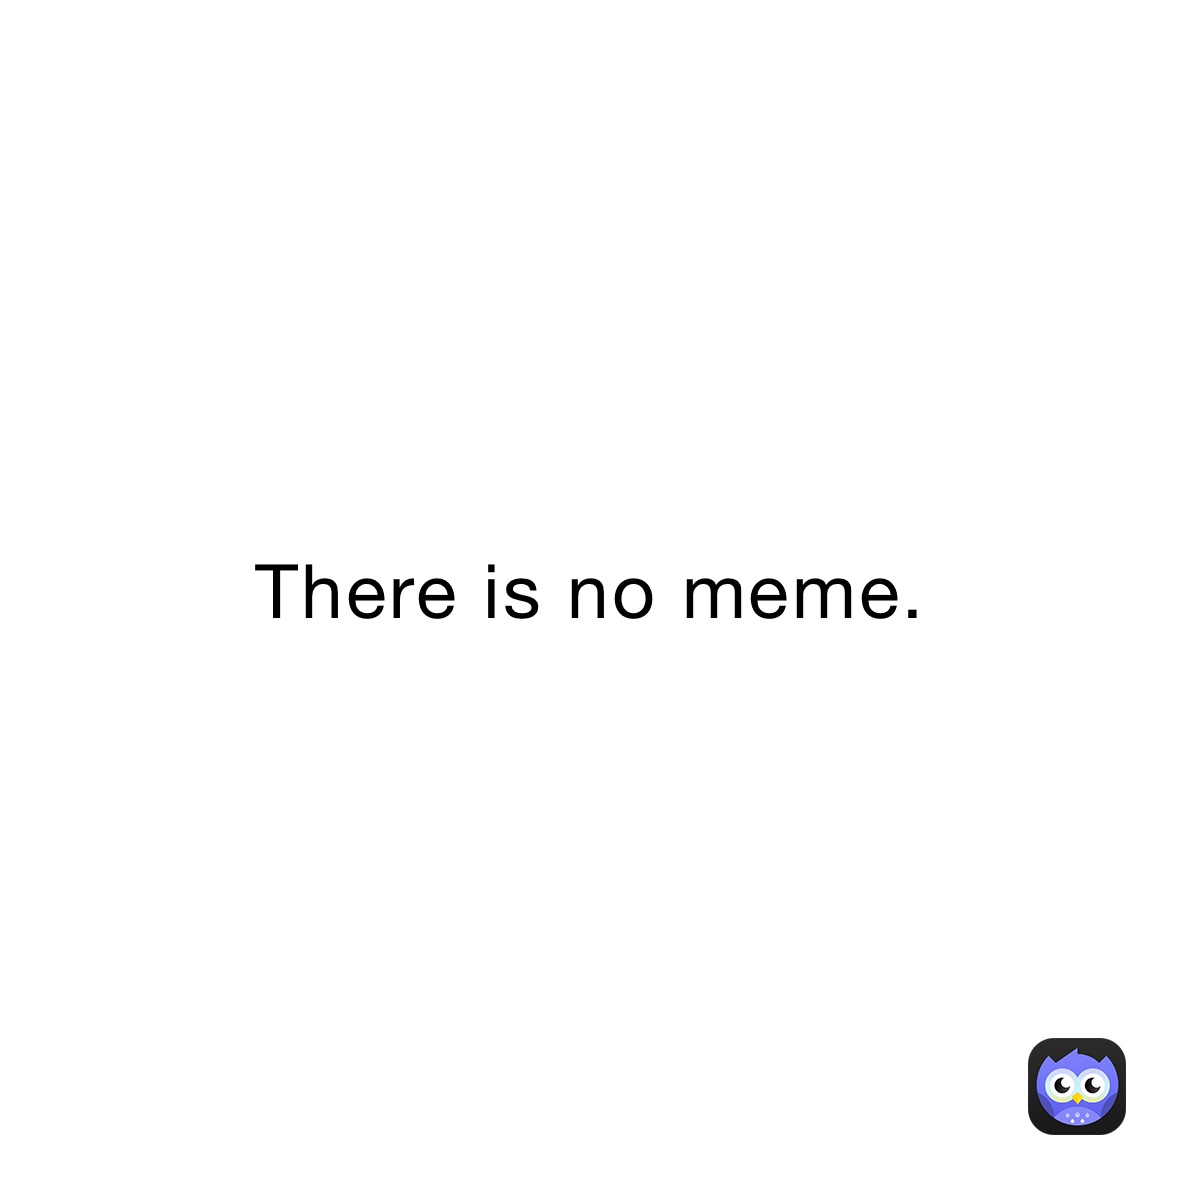 There is no meme.